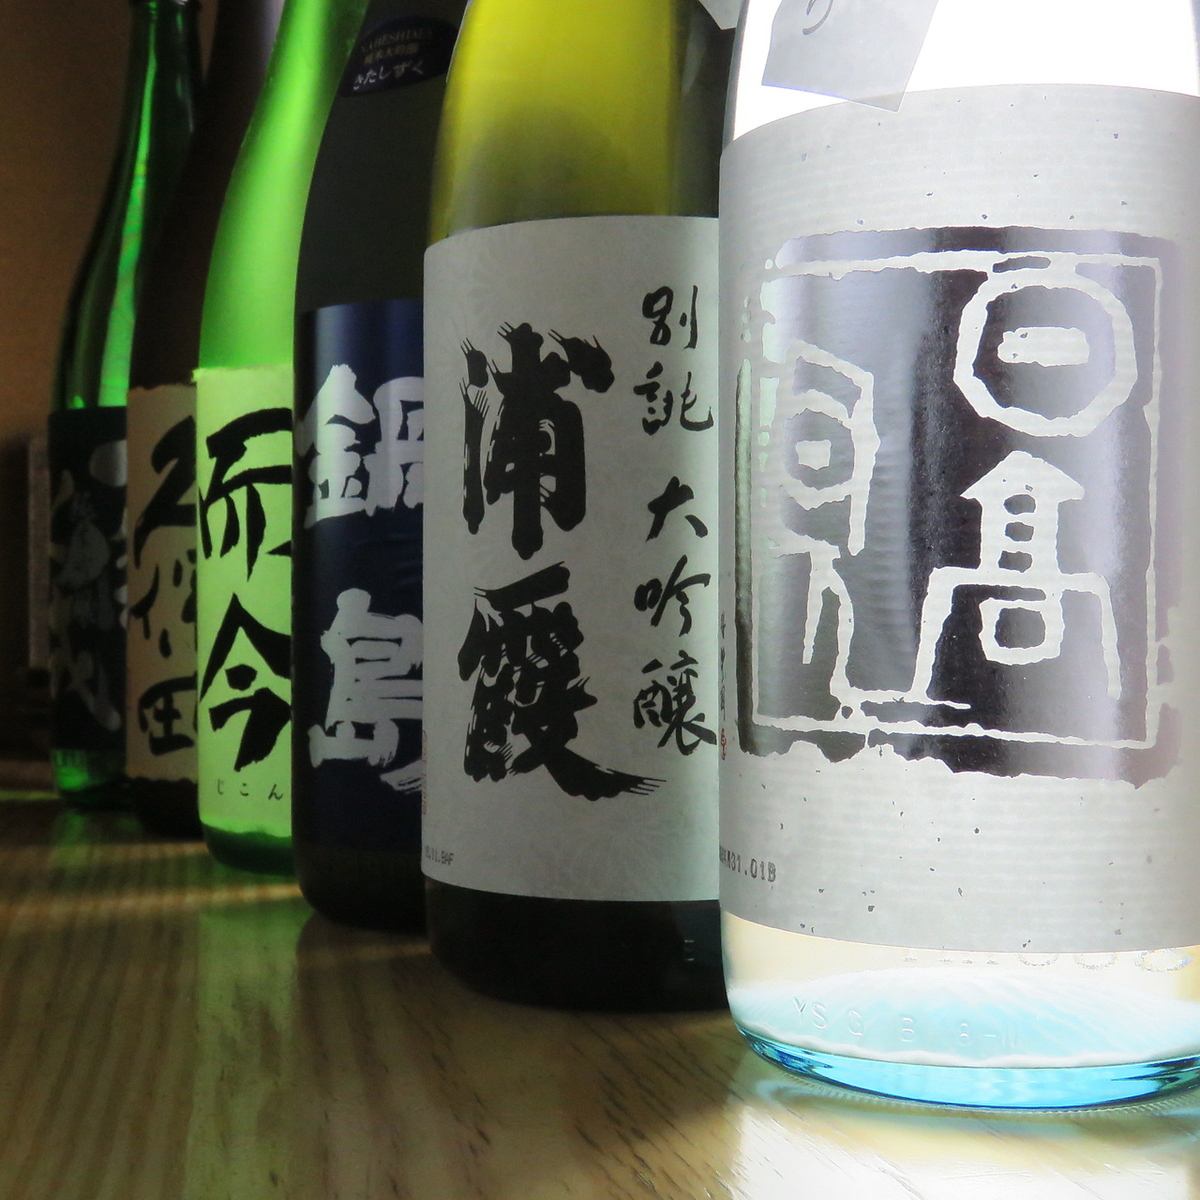 Many stocks of authentic Japanese distilled spirits / local sake etc. are available!